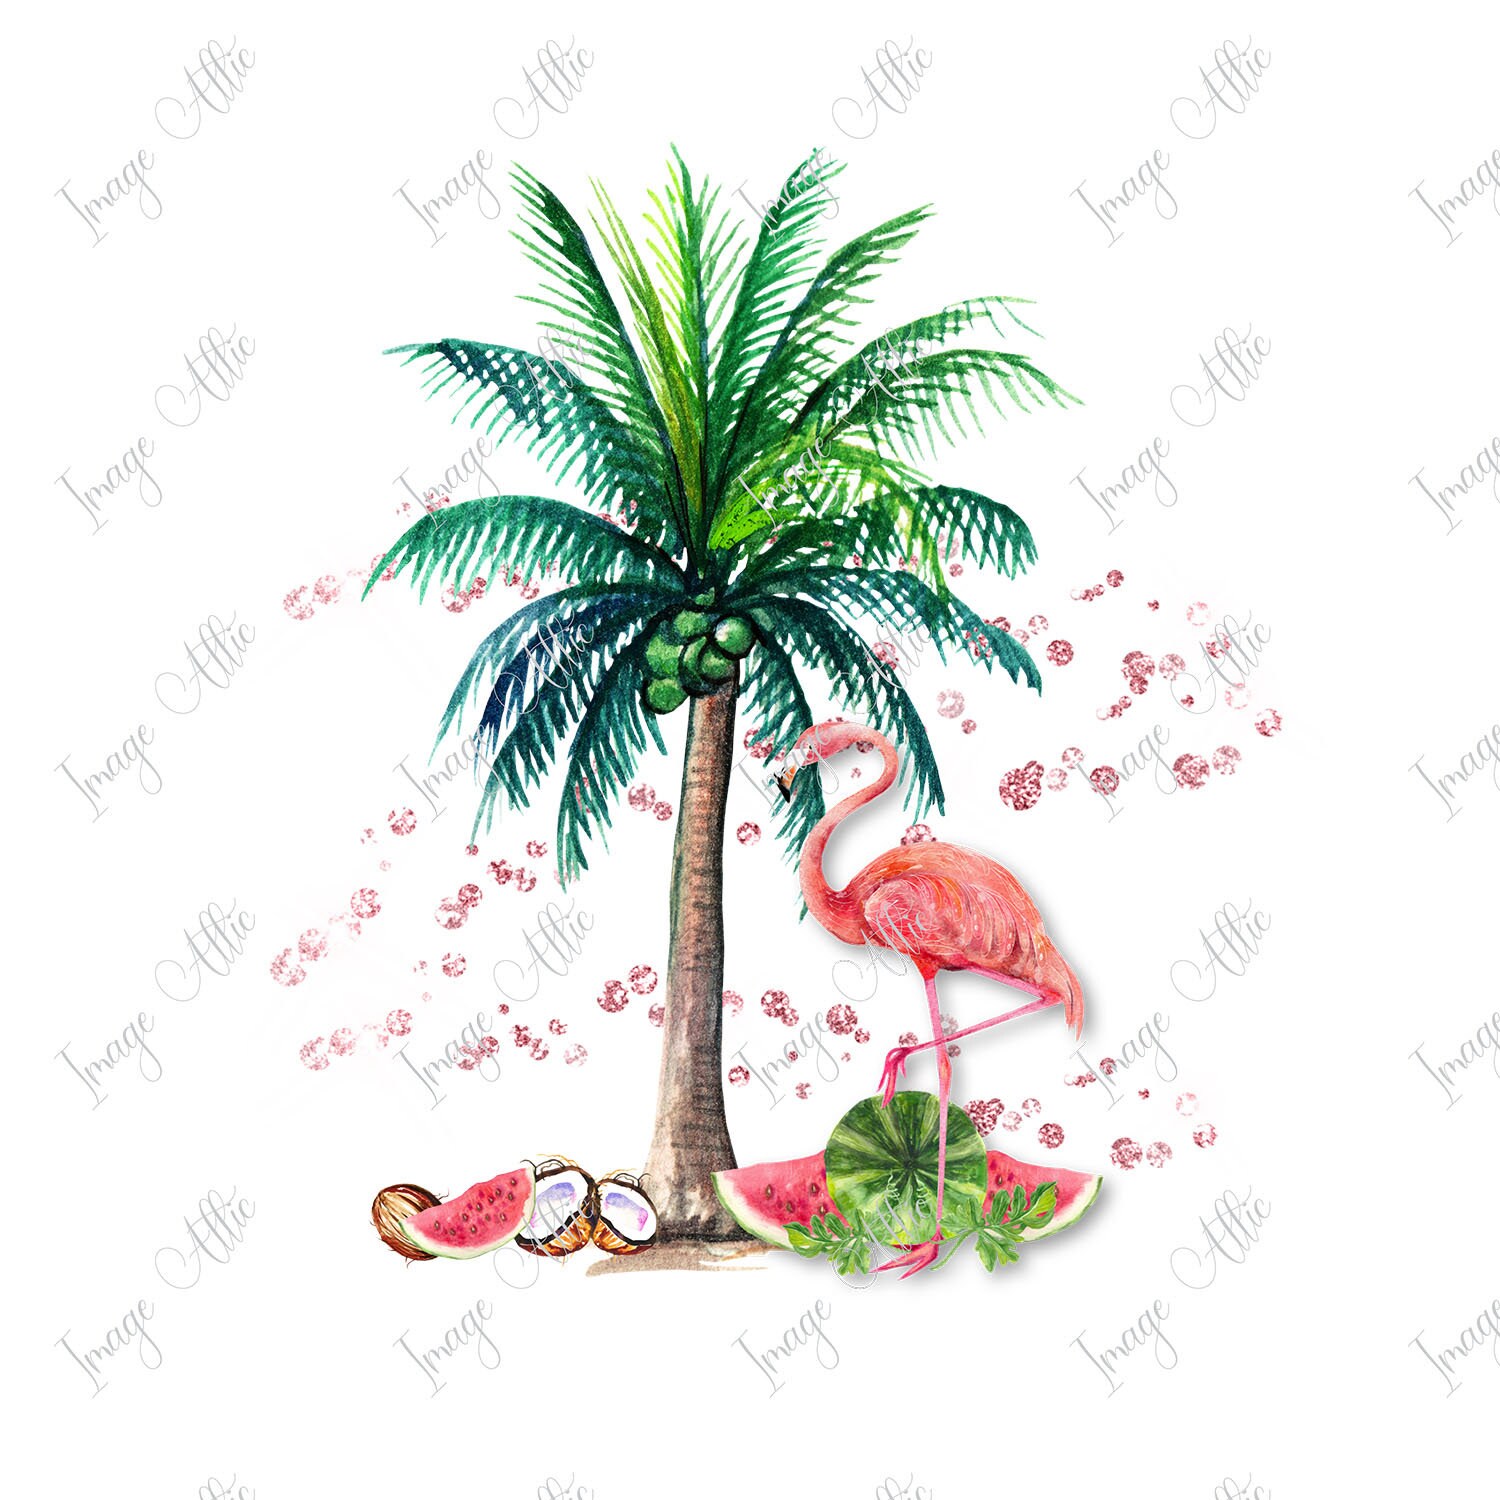 Palm Tree Sticker Illustration Waterproof - Buy Any 4 For $1.75 Each  Storewide!